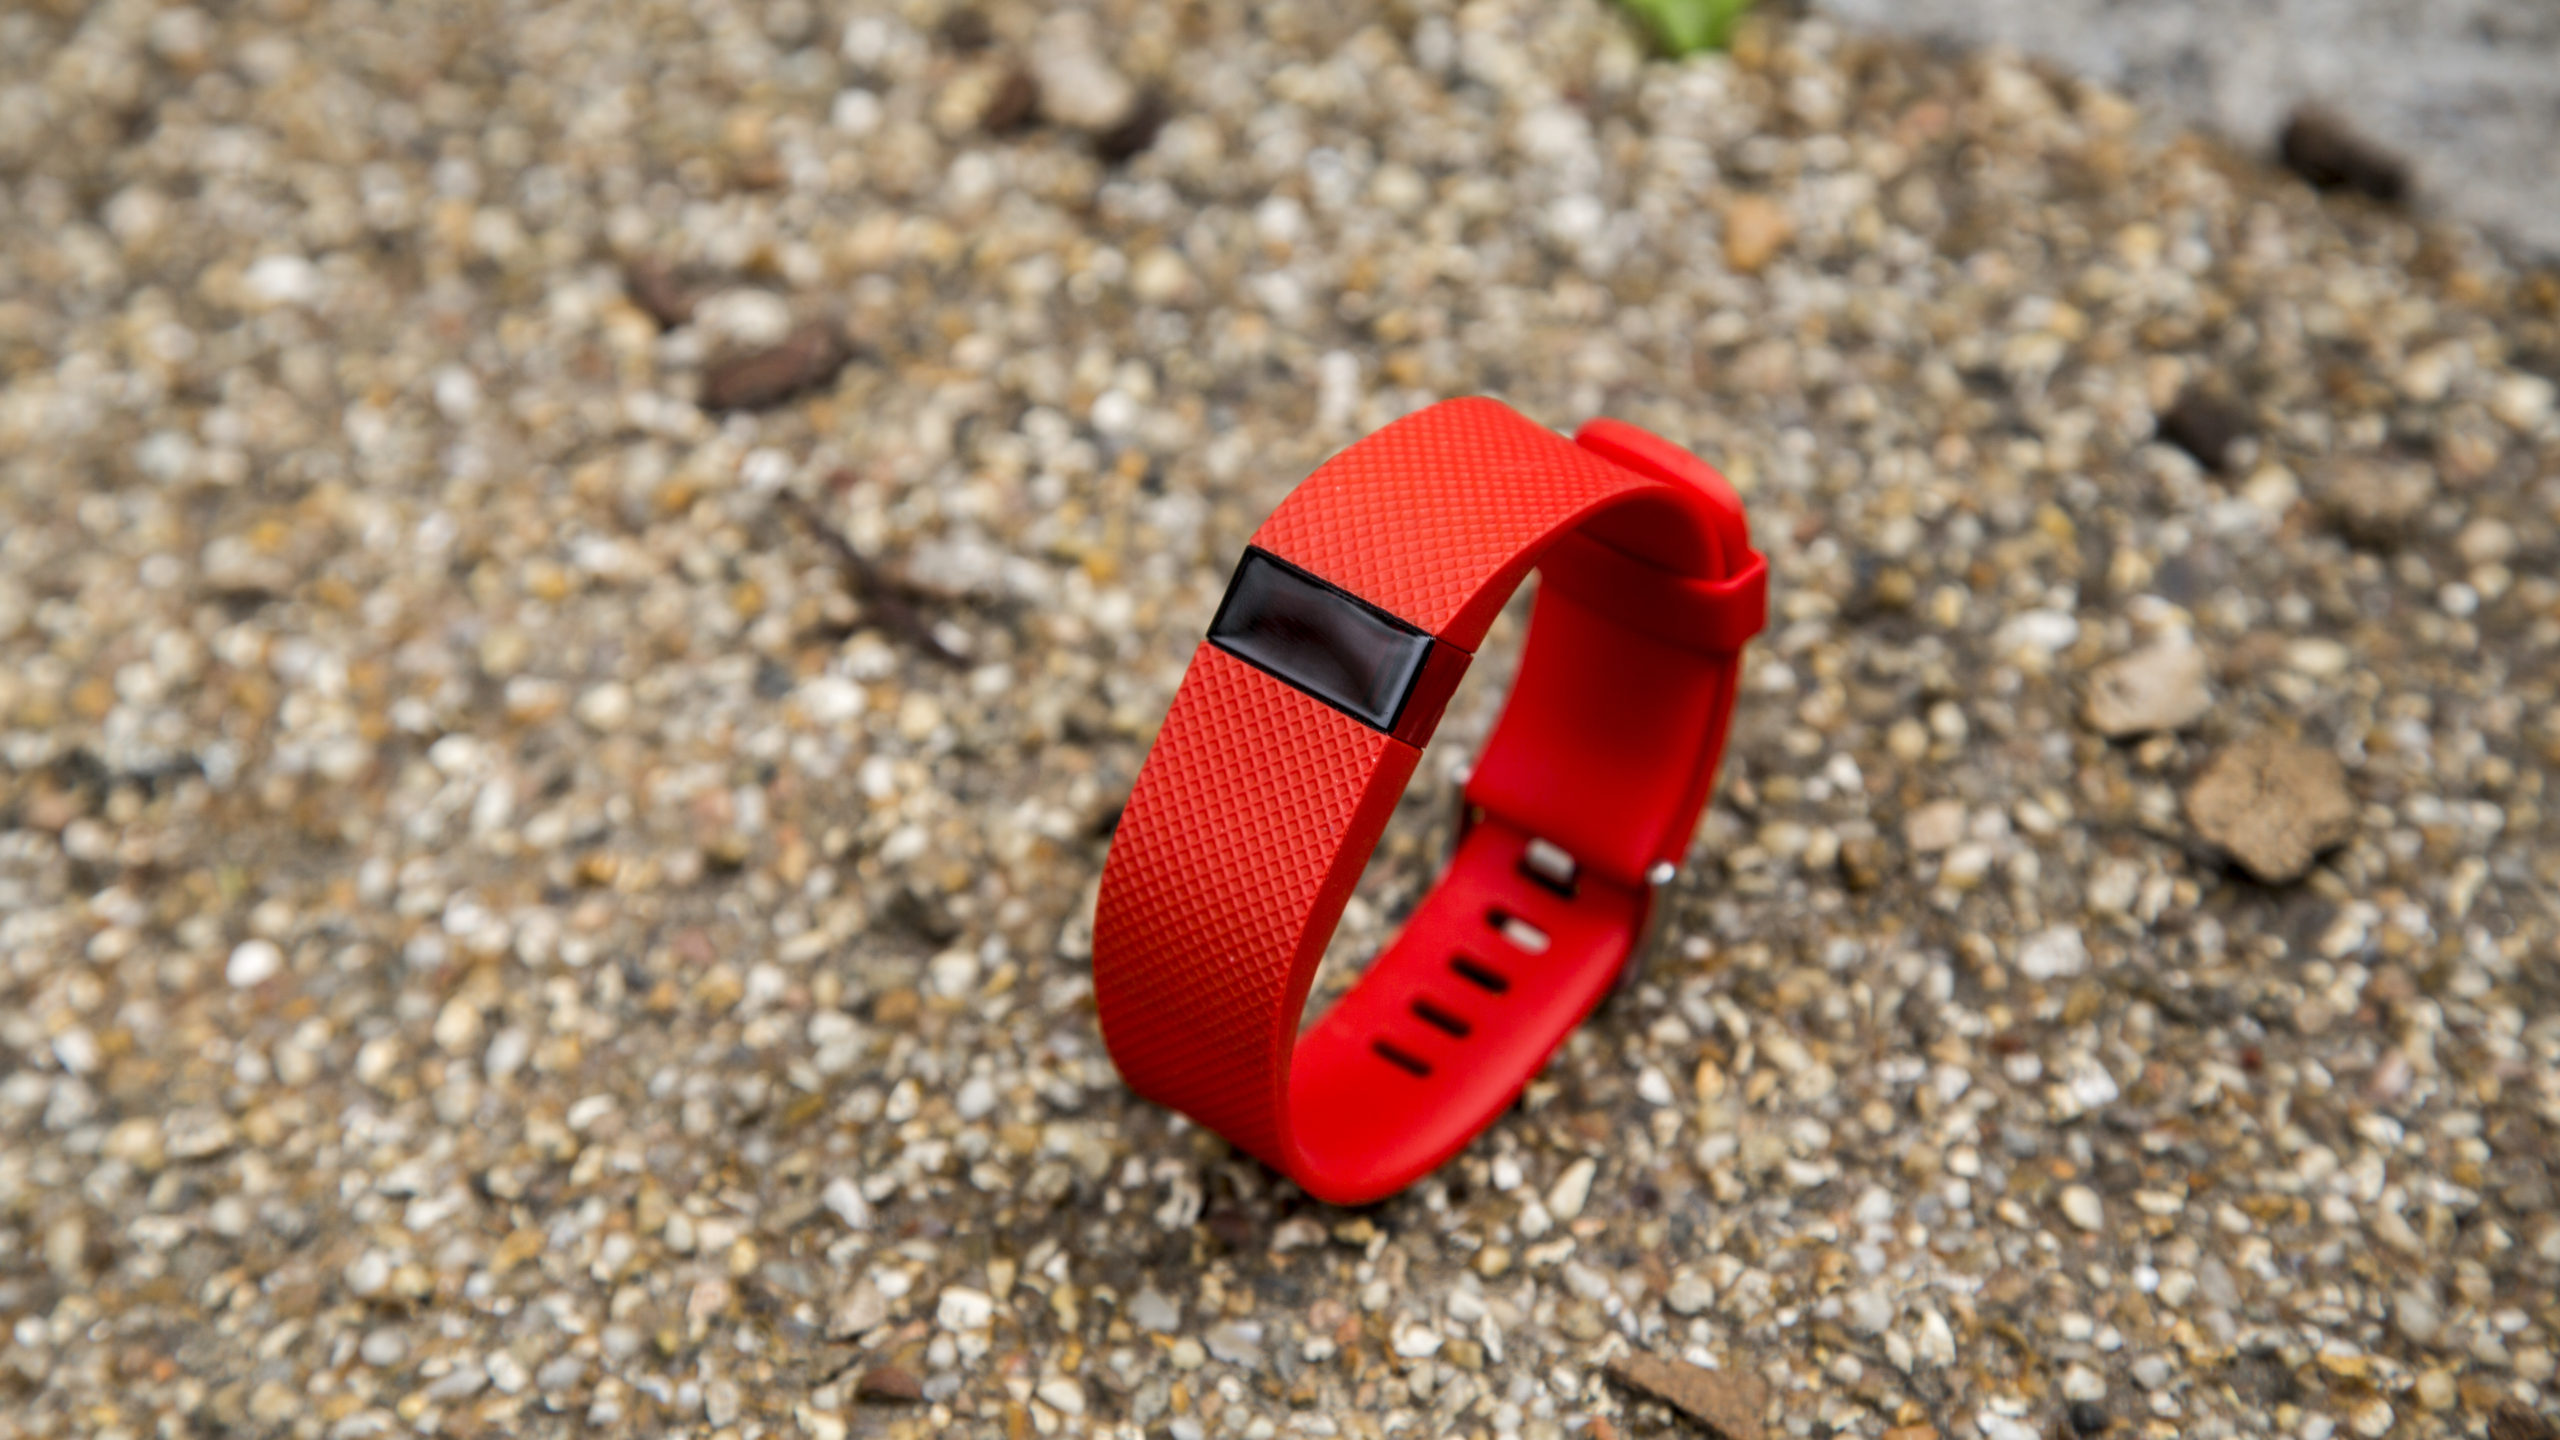 Spændende Polar Sway Fitbit Charge HR review: Super features, but could be more sleek